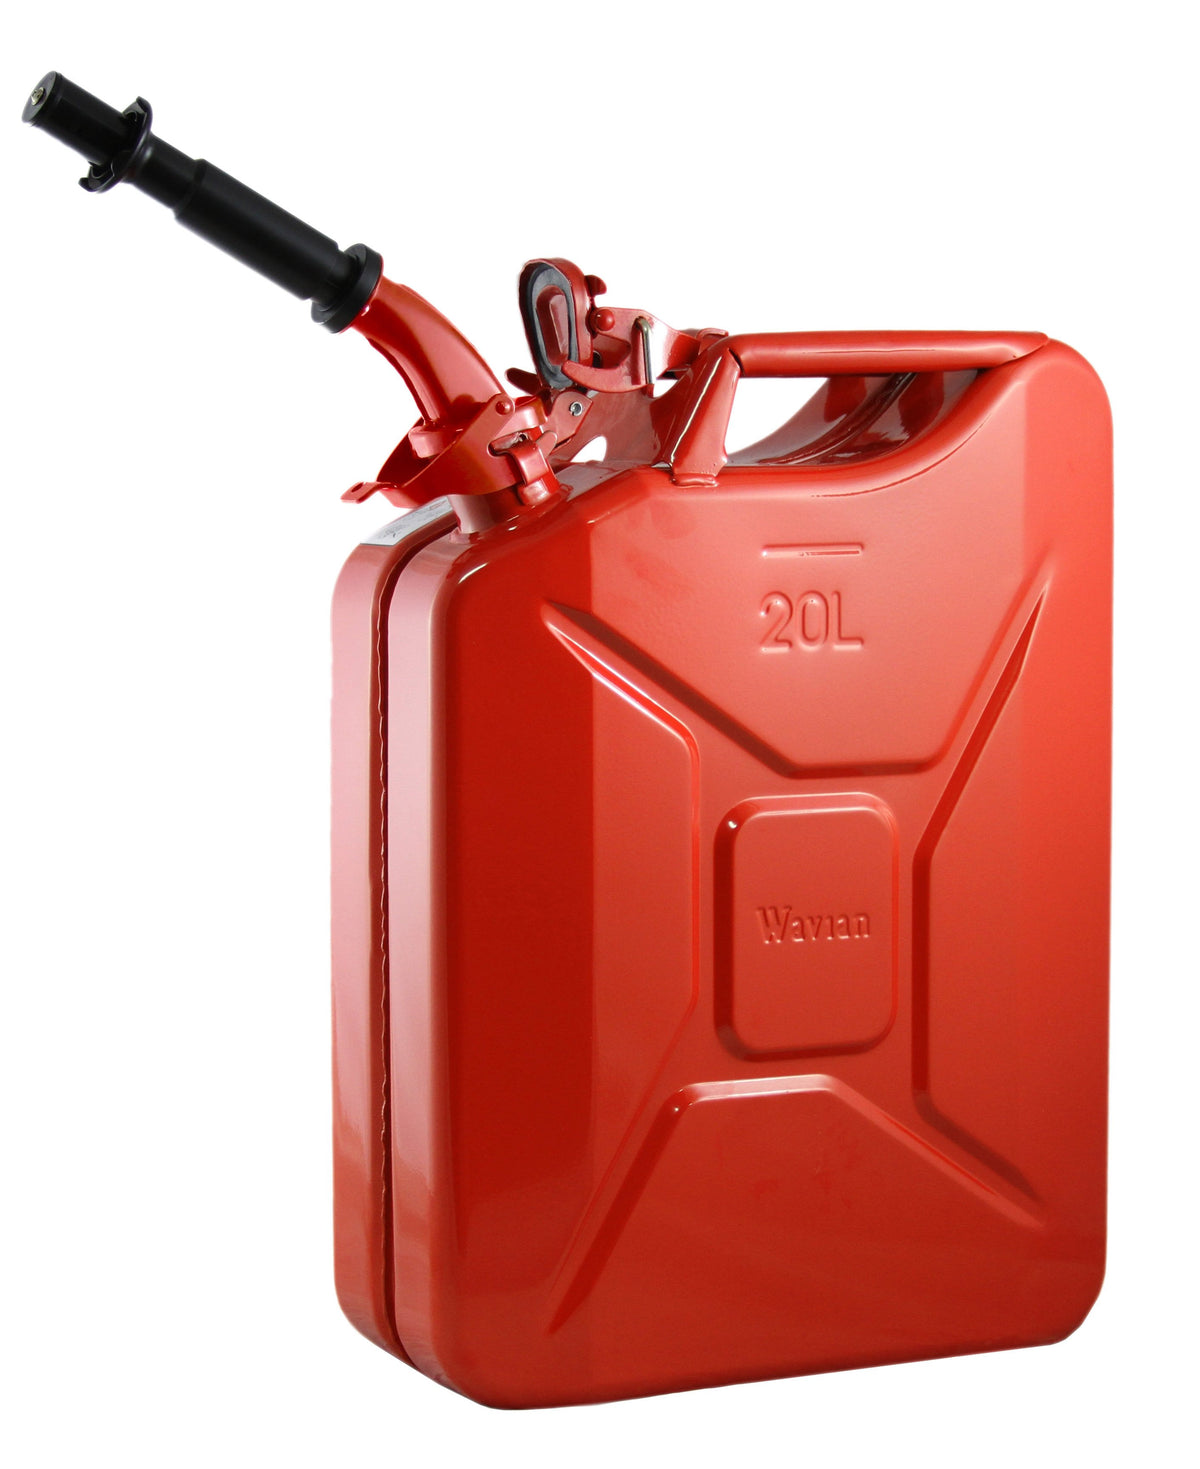 Red 20L Fuel Can